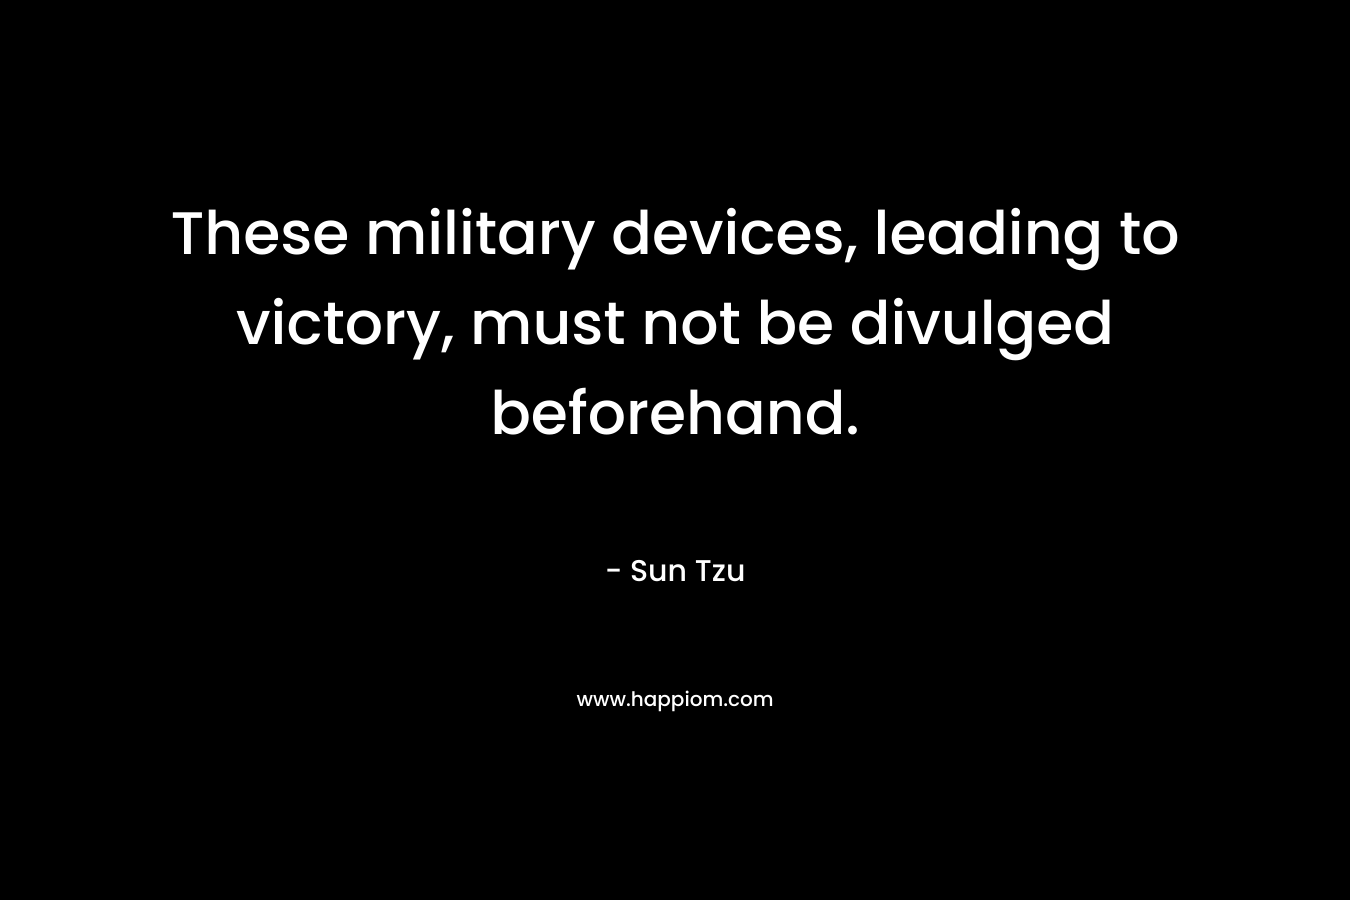 These military devices, leading to victory, must not be divulged beforehand.